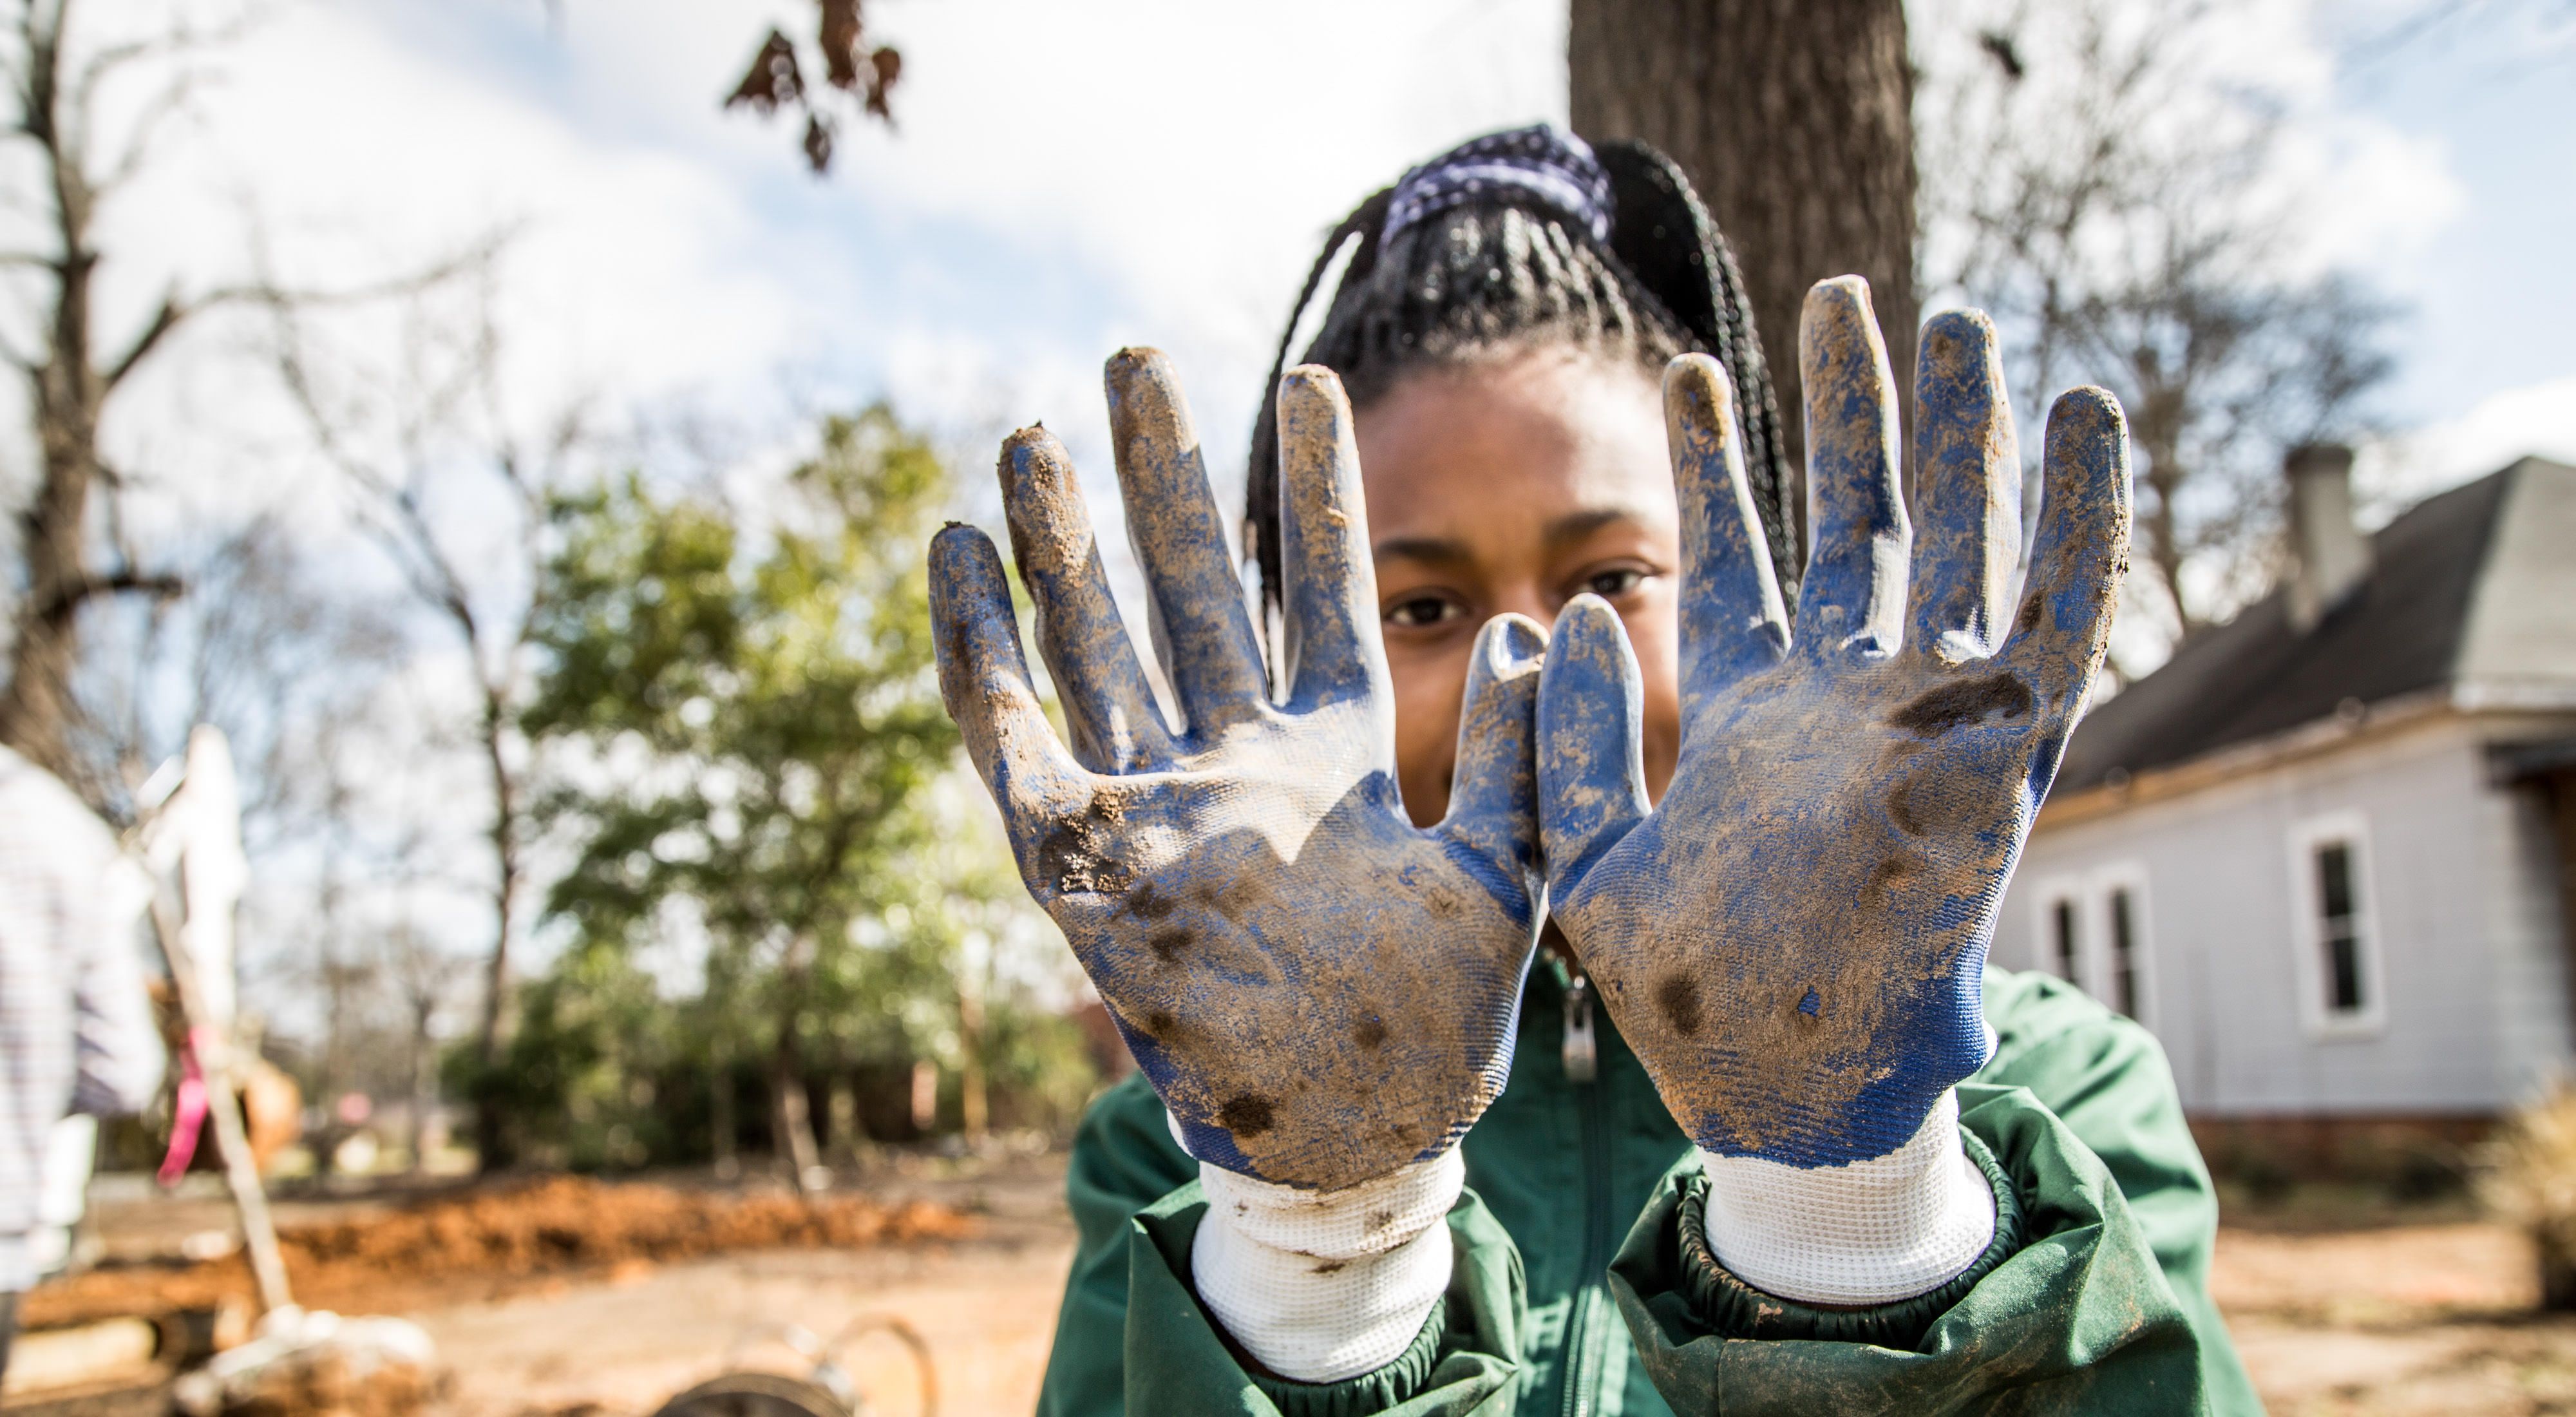 A young girl holds her gloved hands up to show off the dirt she got on them plantin trees